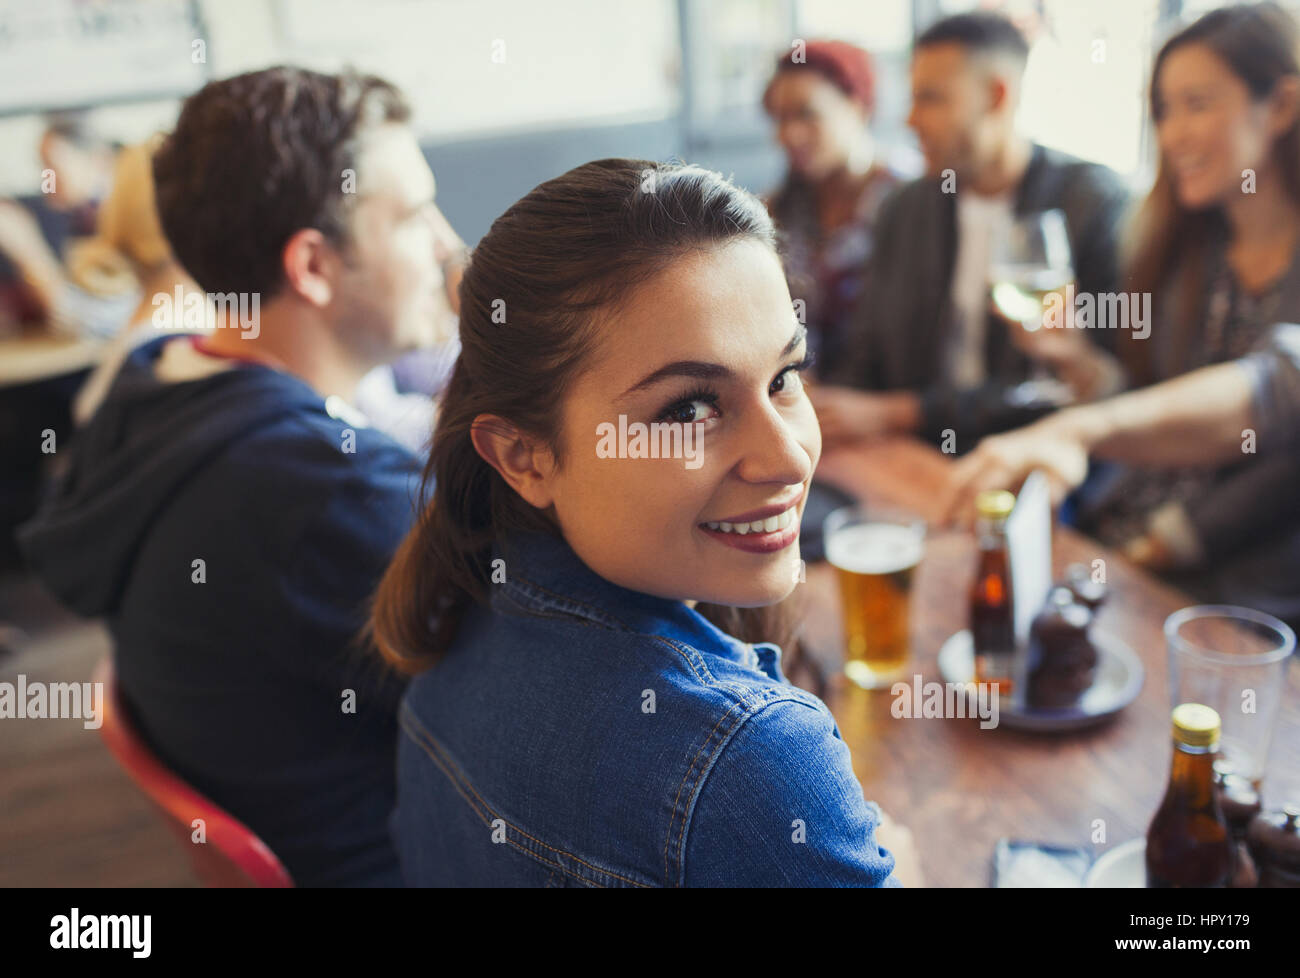 Portrait smiling woman drinking beer with friends at table in bar Stock Photo